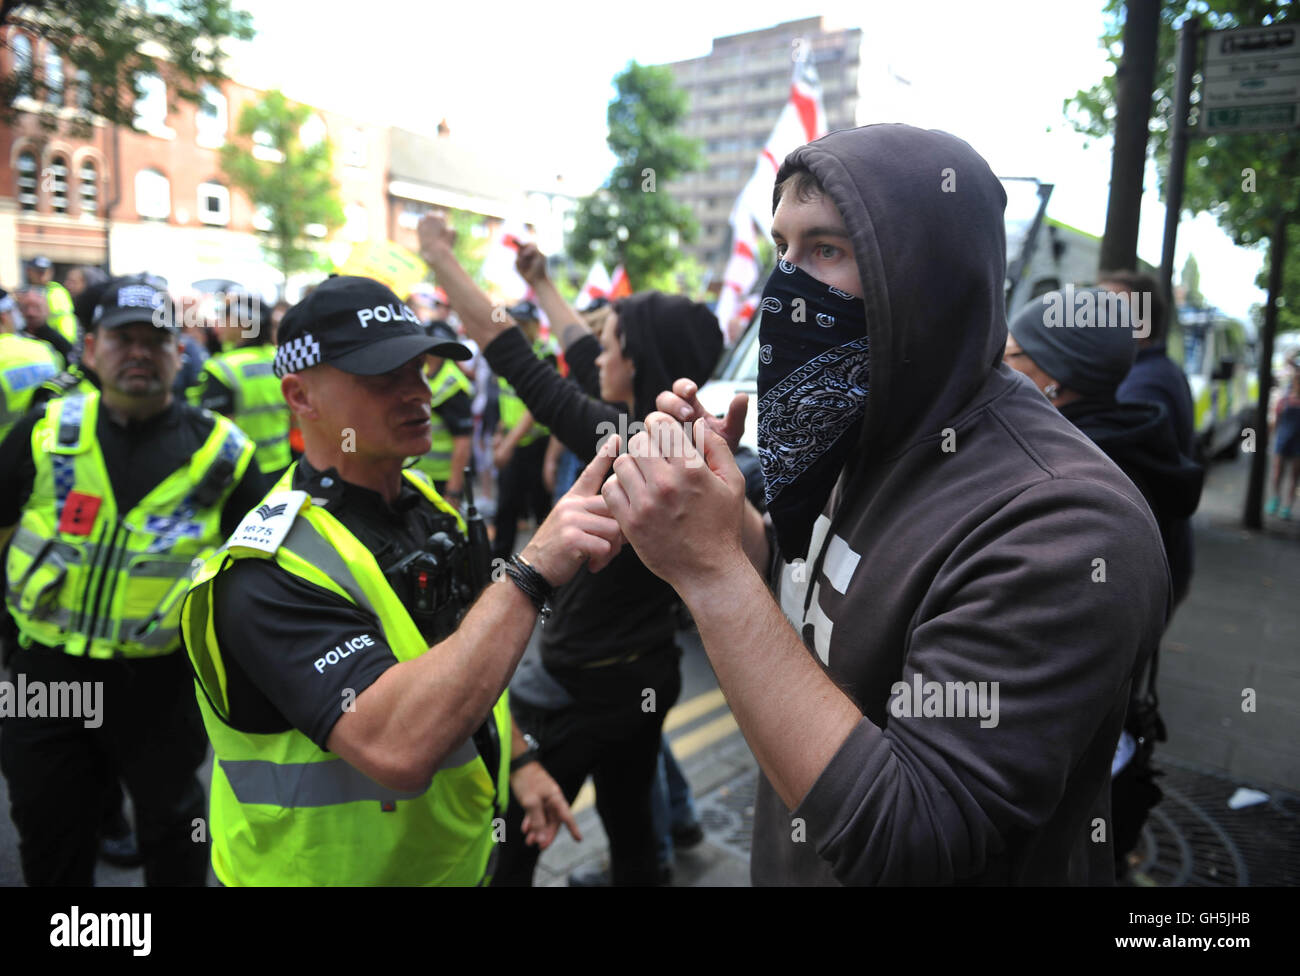 Members of the Nottingham Anti-Fascism group are cordoned off by police as protesters from the far-right group EDL (English Defence League) gather in the city of Nottingham. Nottinghamshire Police cordoned off city centre streets as the group made their way from Castle Wharf to the city centre. Stock Photo